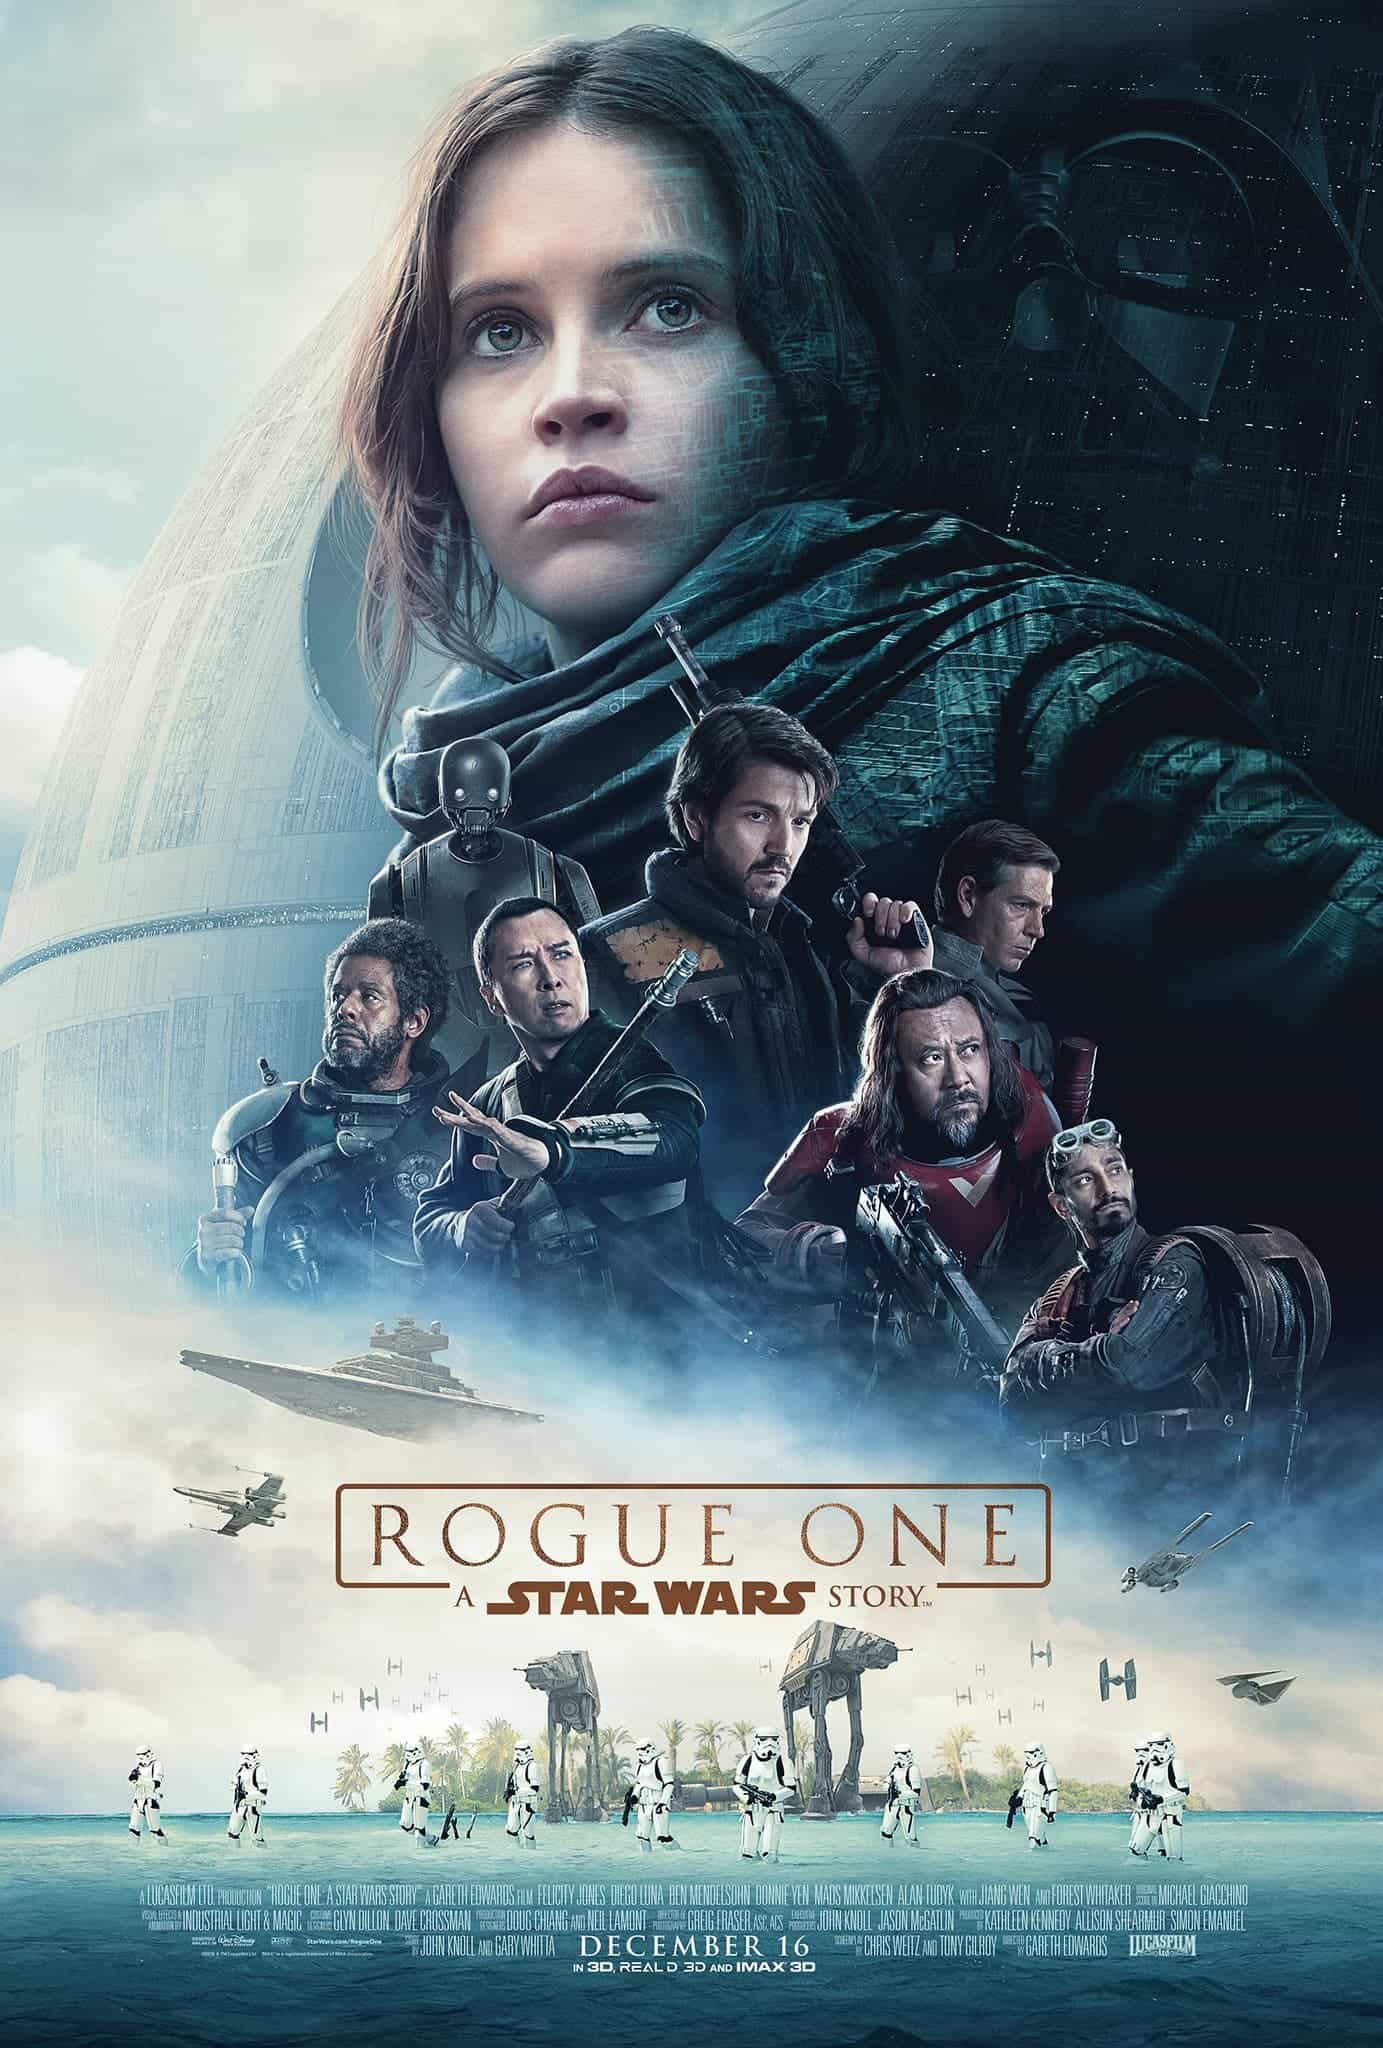 Rogue One is the title of the first Star Wars 